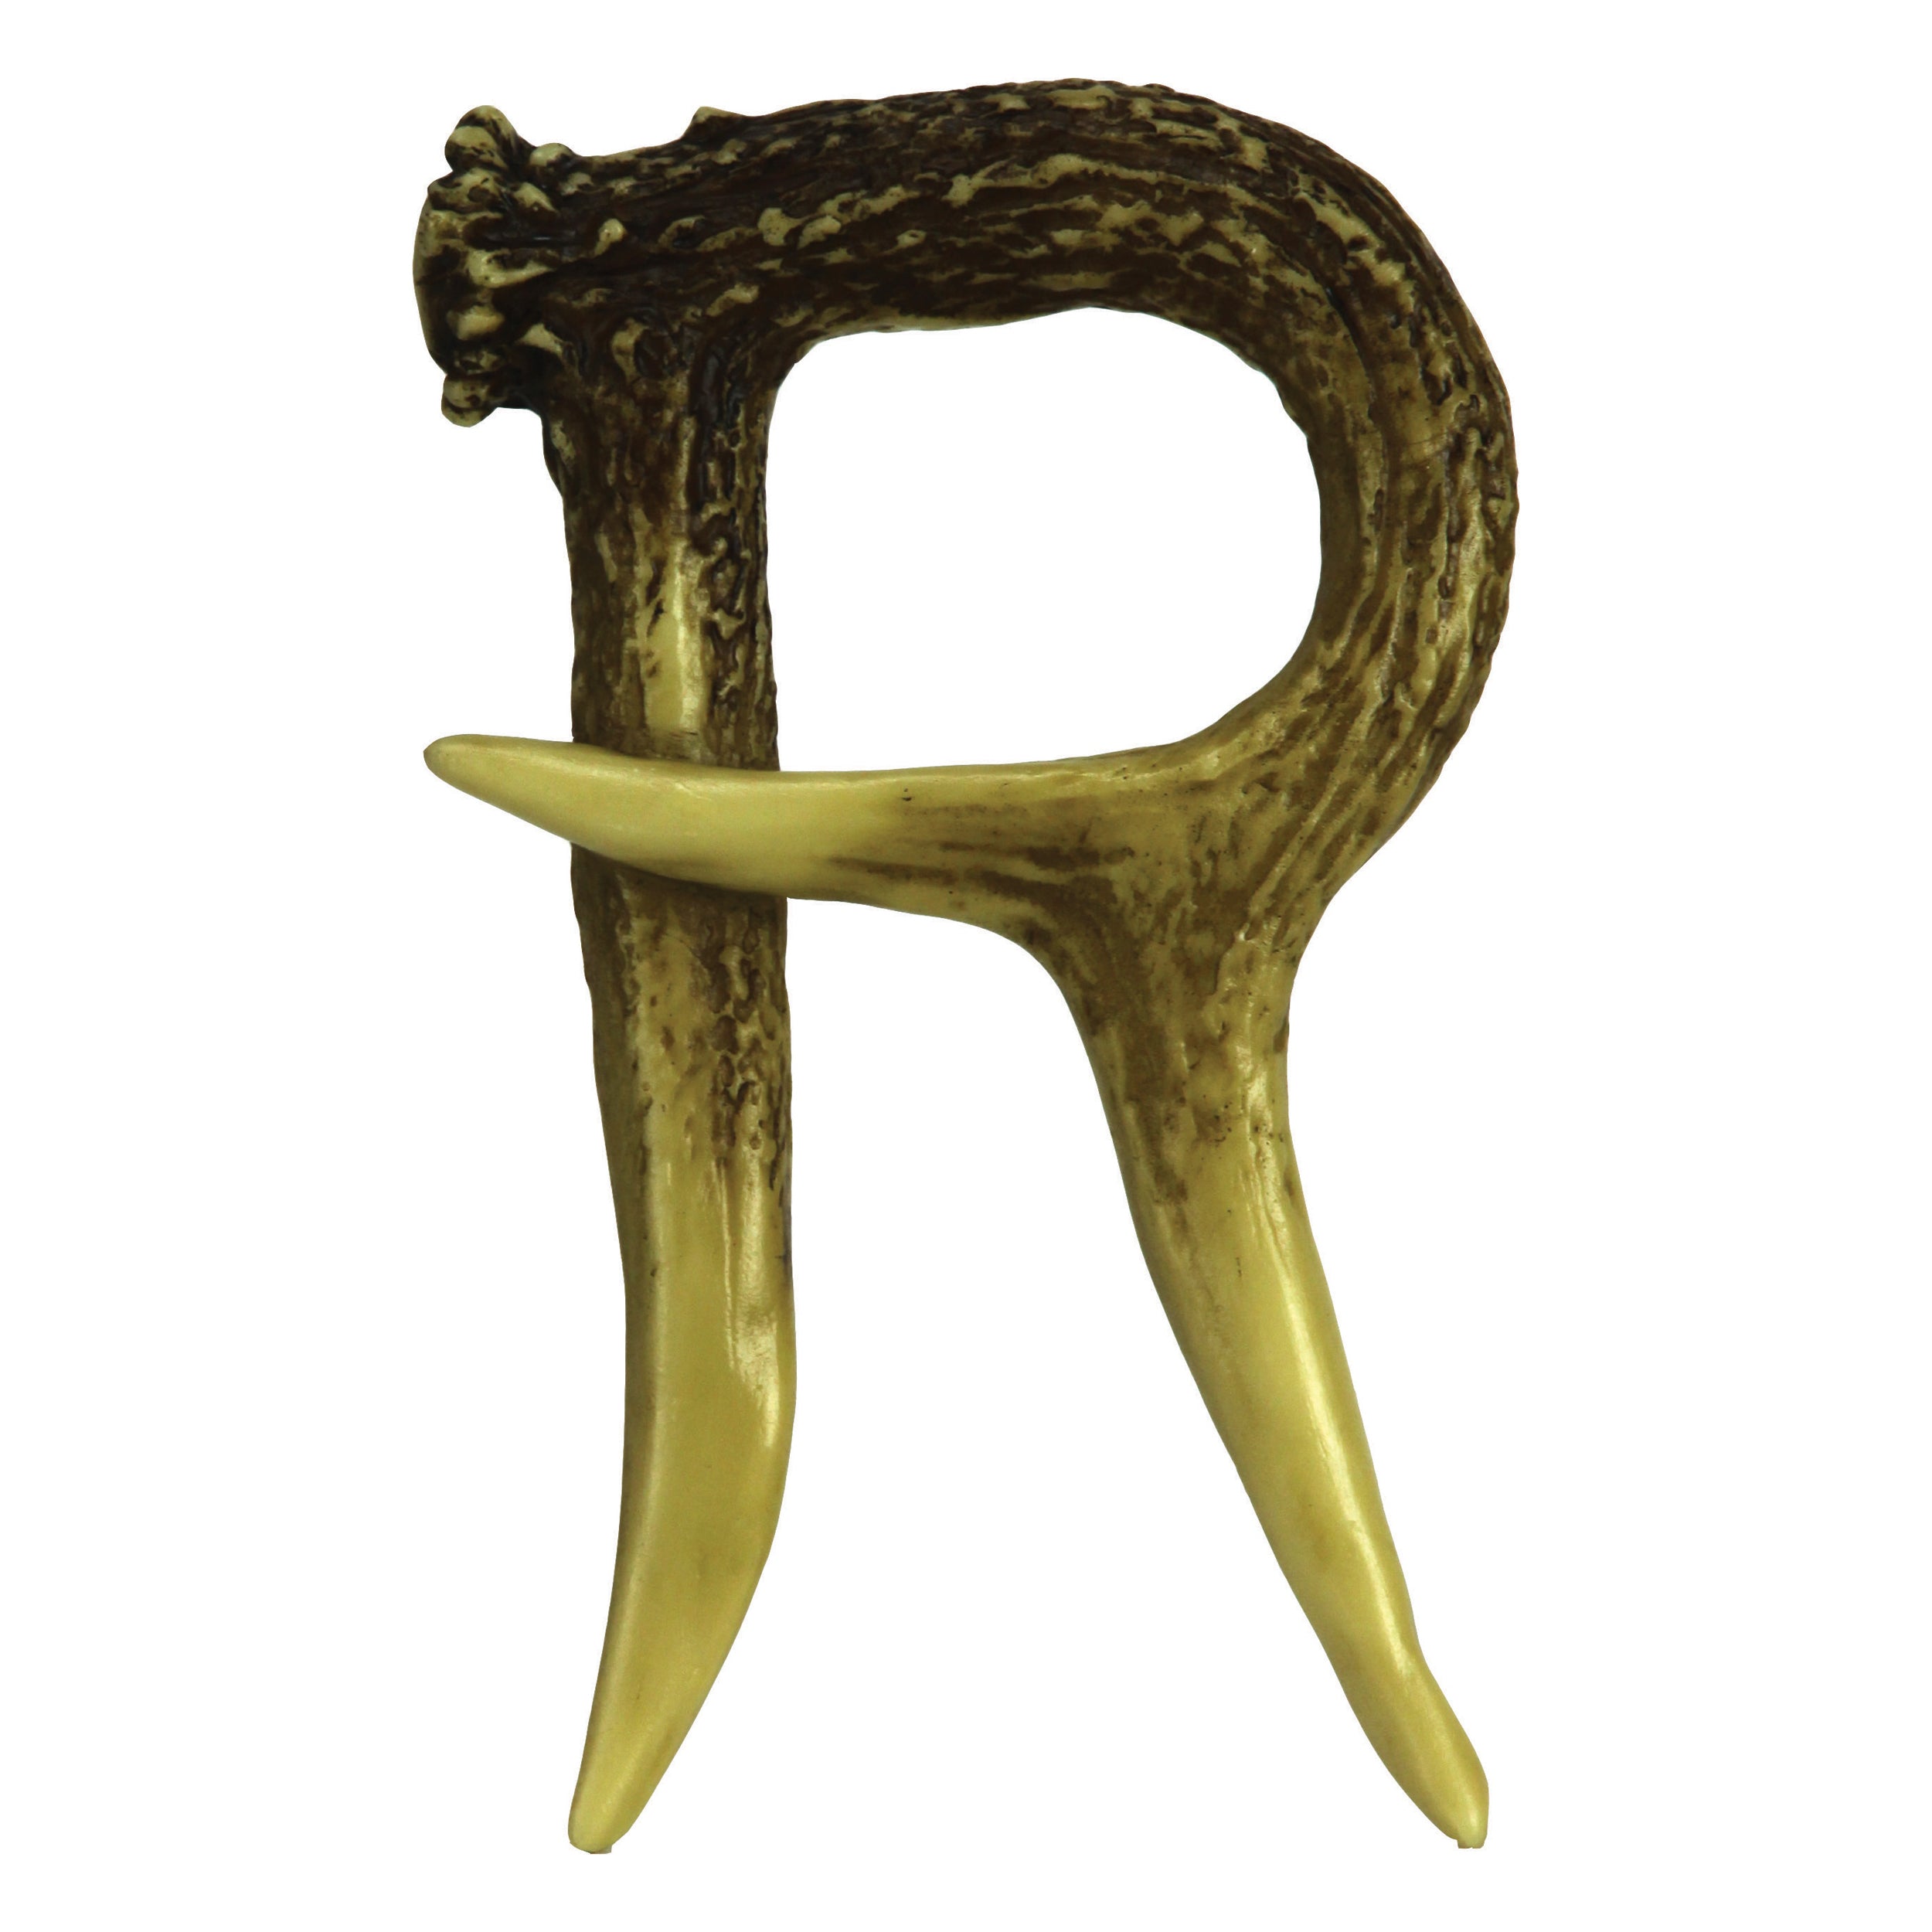 Rivers Edge Products Decorative Antler Letter R, Rustic Wall Mounted Decor